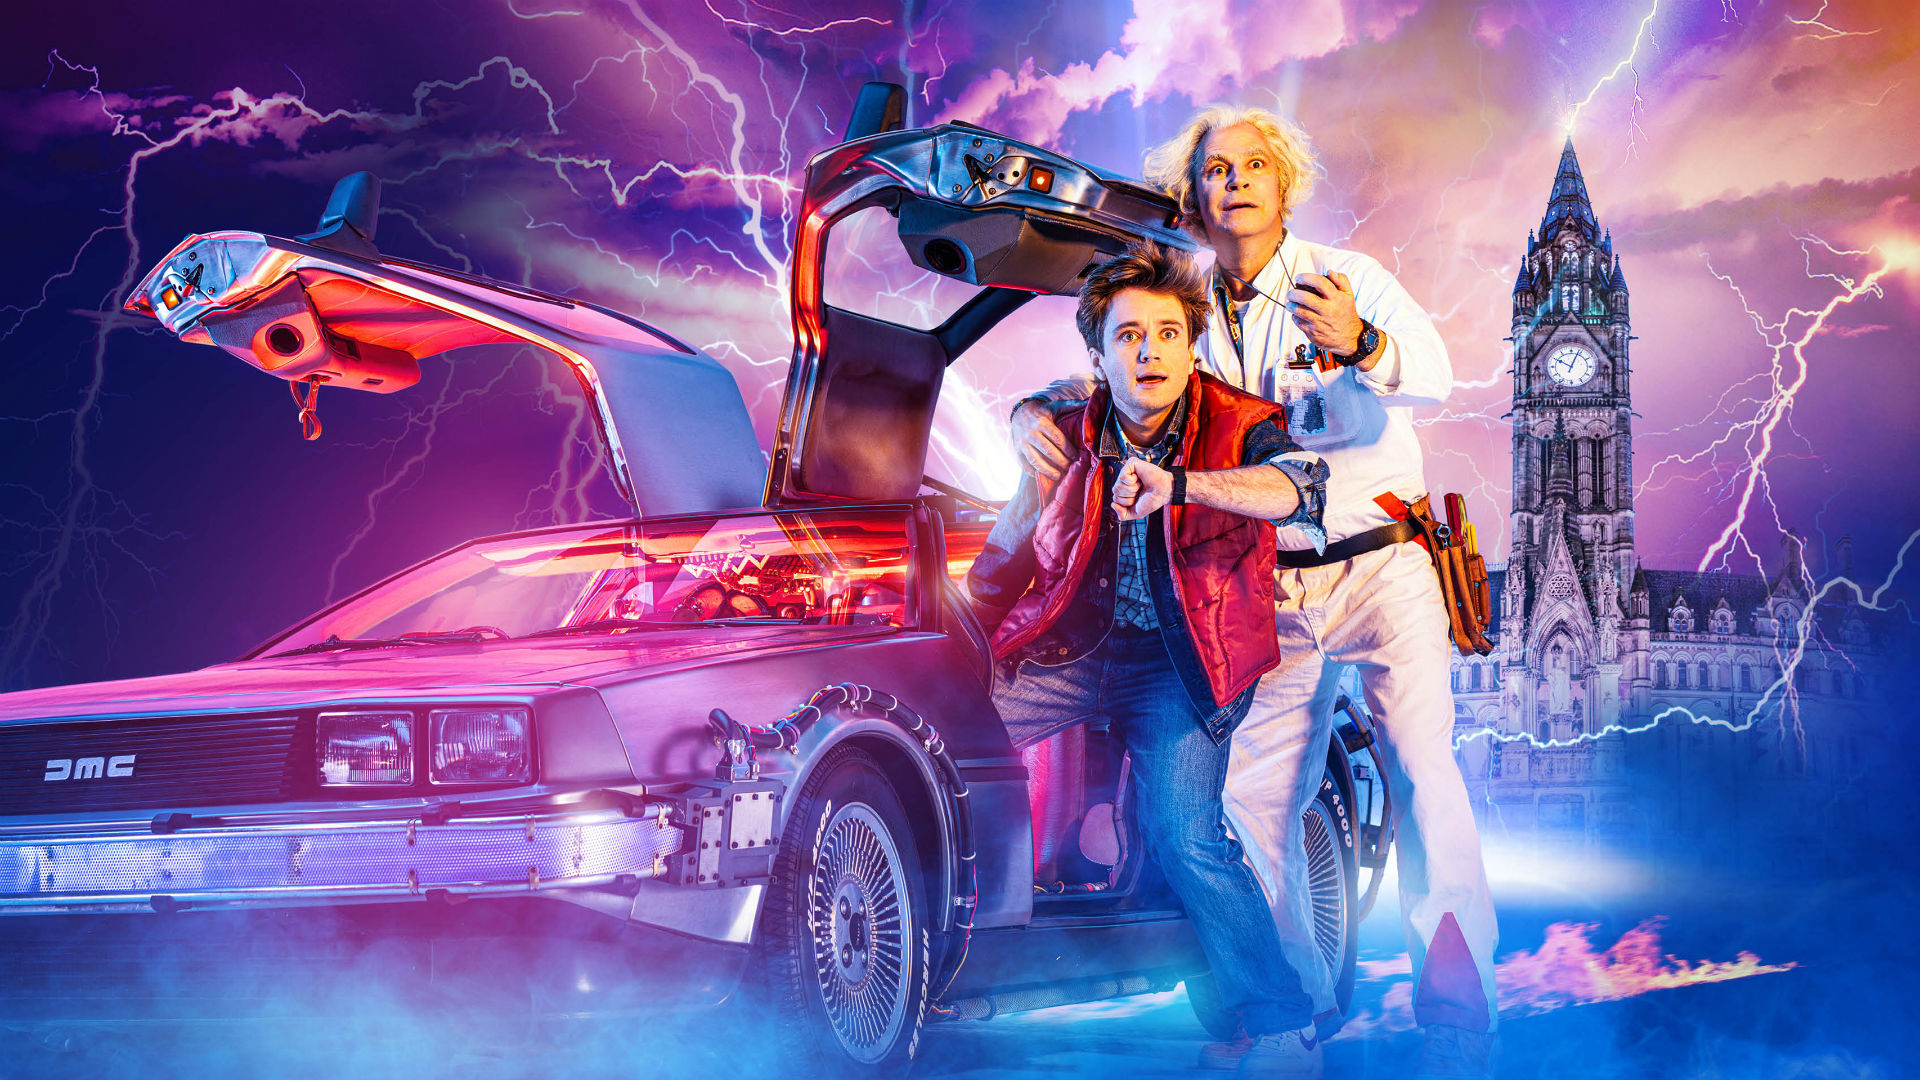 Marty McFly and Doc Brown stand next to their time-travelling DeLorean car as lightning flashes around them.